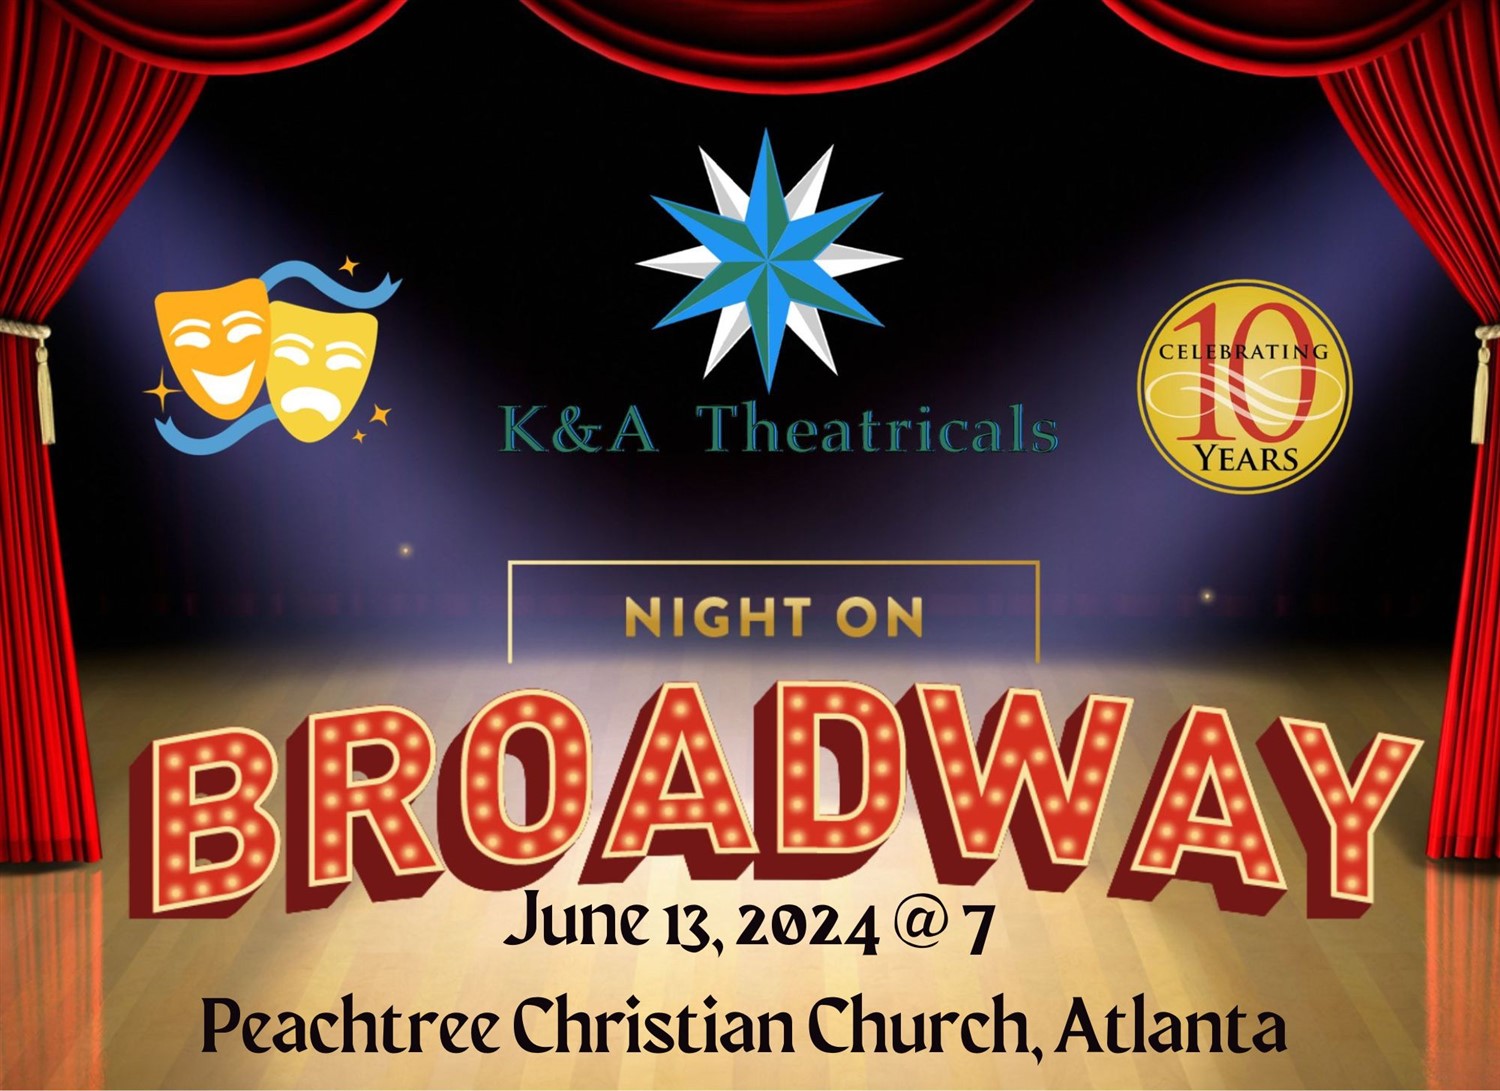 K&A Theatricals Night of Broadway Celebrating 10 Years of Broadway Performing Arts. A Benefit for the K&A Theatricals Scholarship Fund on jun. 13, 19:00@Peachtree Christian Church - Compra entradas y obtén información enWww.kandatheatricals.com 